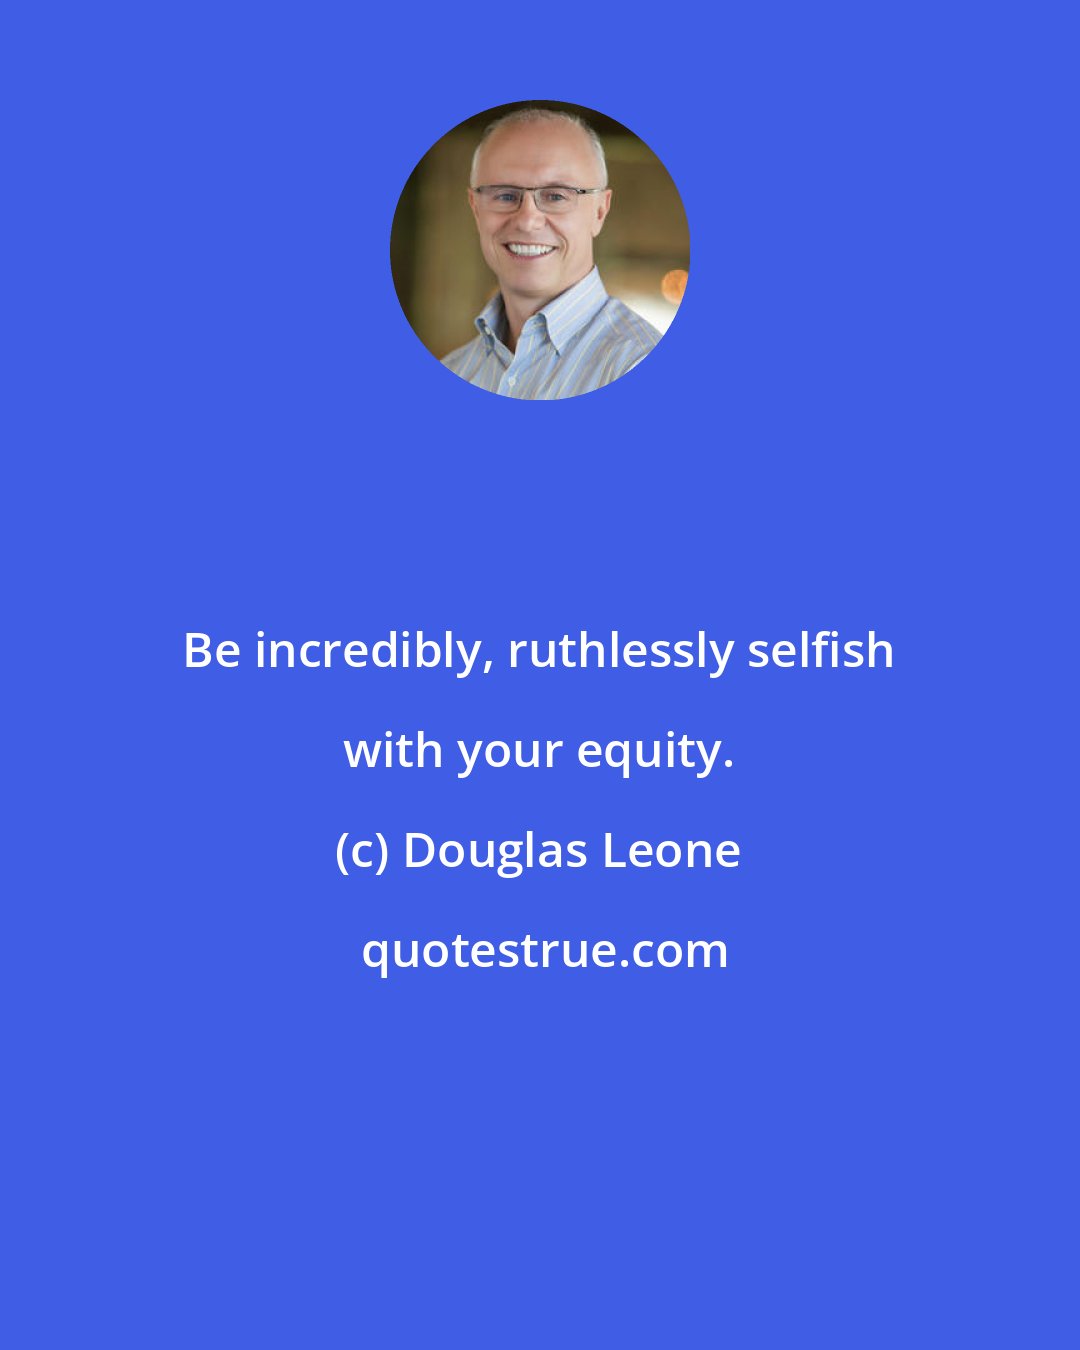 Douglas Leone: Be incredibly, ruthlessly selfish with your equity.